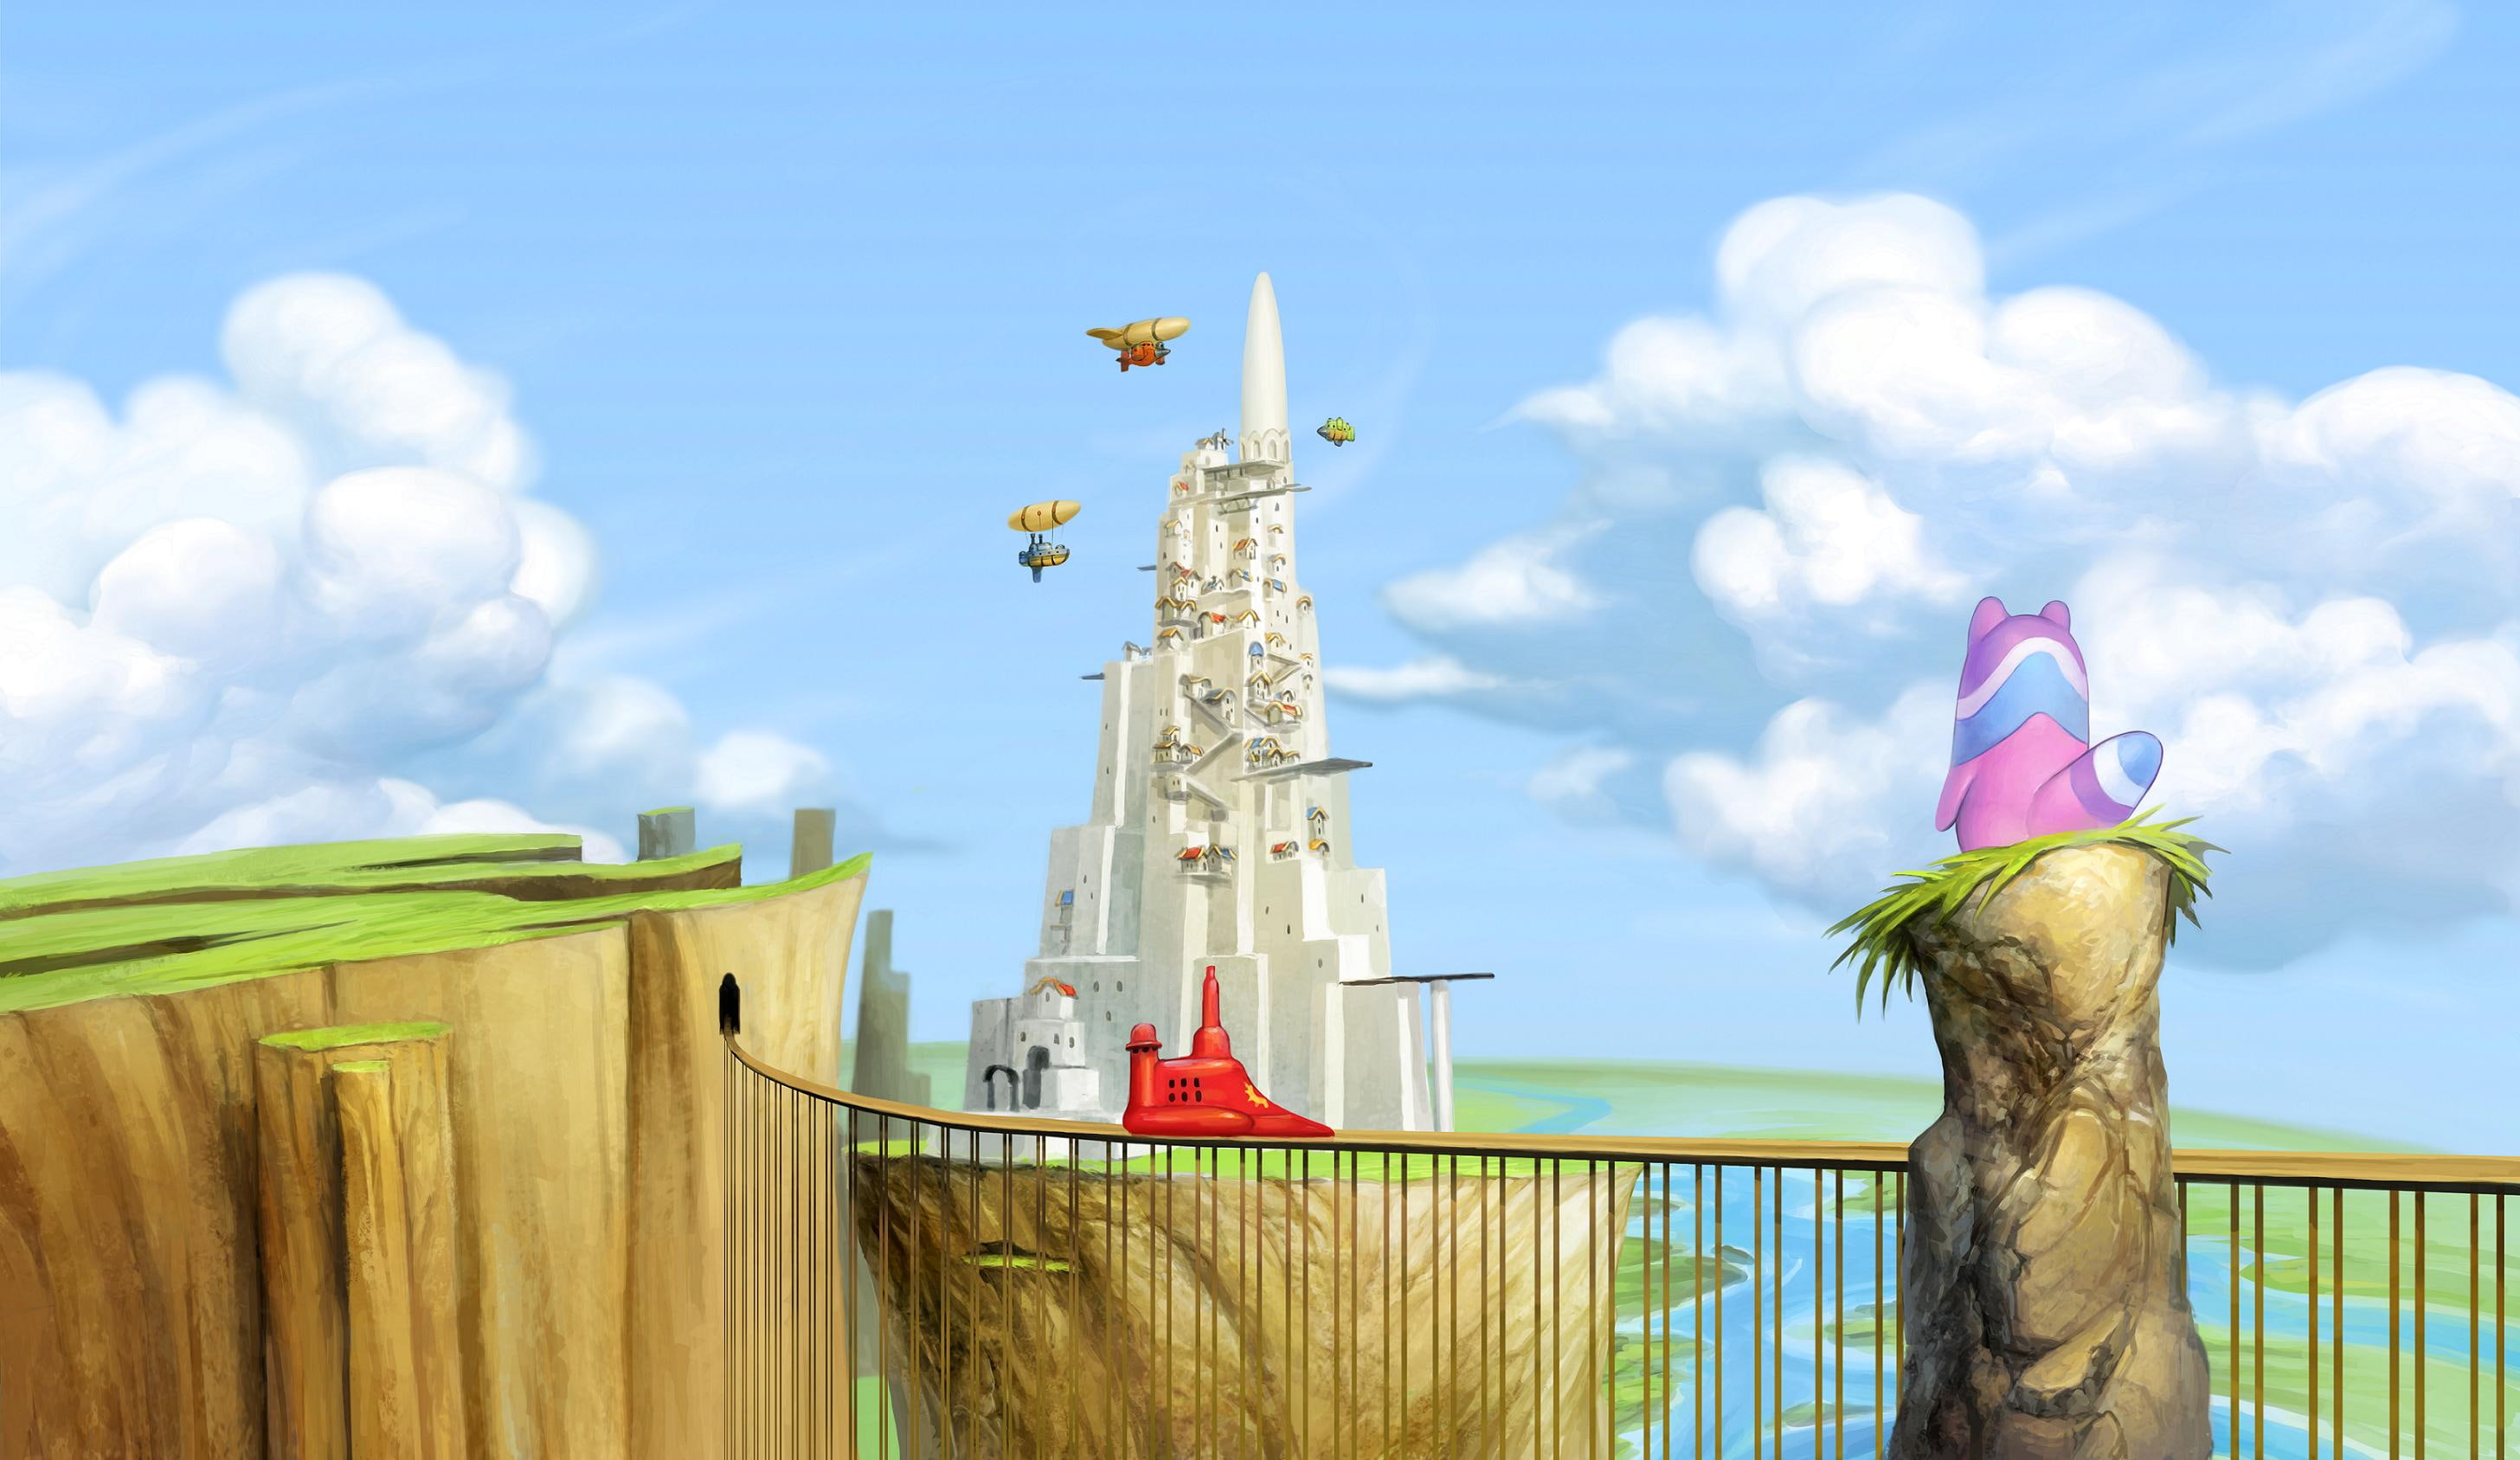 Spineworld, Fantasy Art, Sky, Landscape, Clouds, Tower, Airships, white concrete building and bride illustration